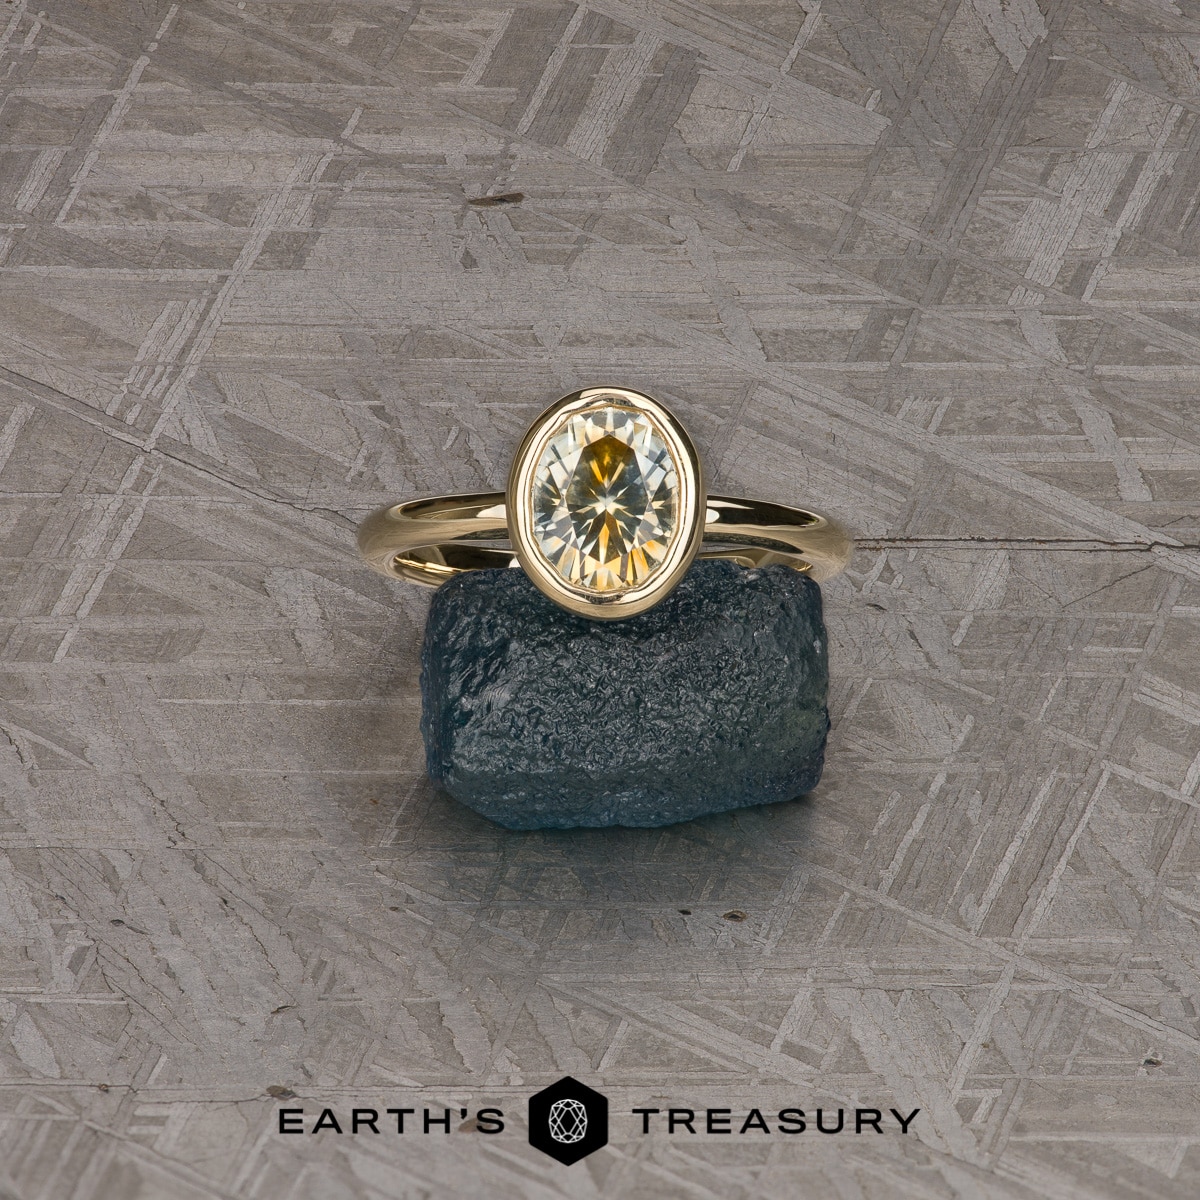 The "Deirdre" in 14k yellow gold with 1.50-Carat Montana Sapphire